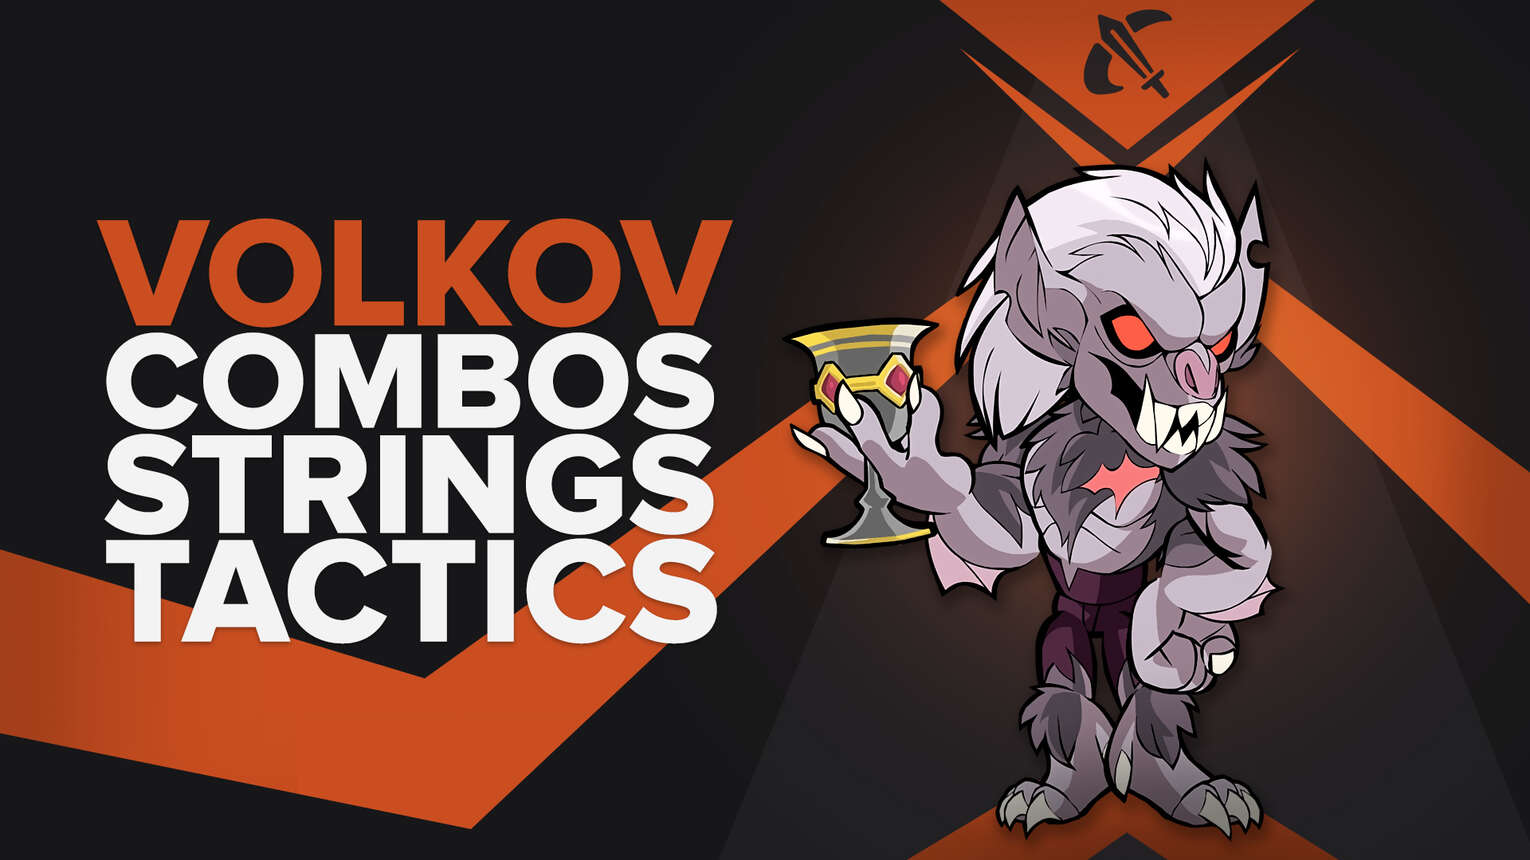 Best Volkov combos, strings, and combat tactics in Brawlhalla